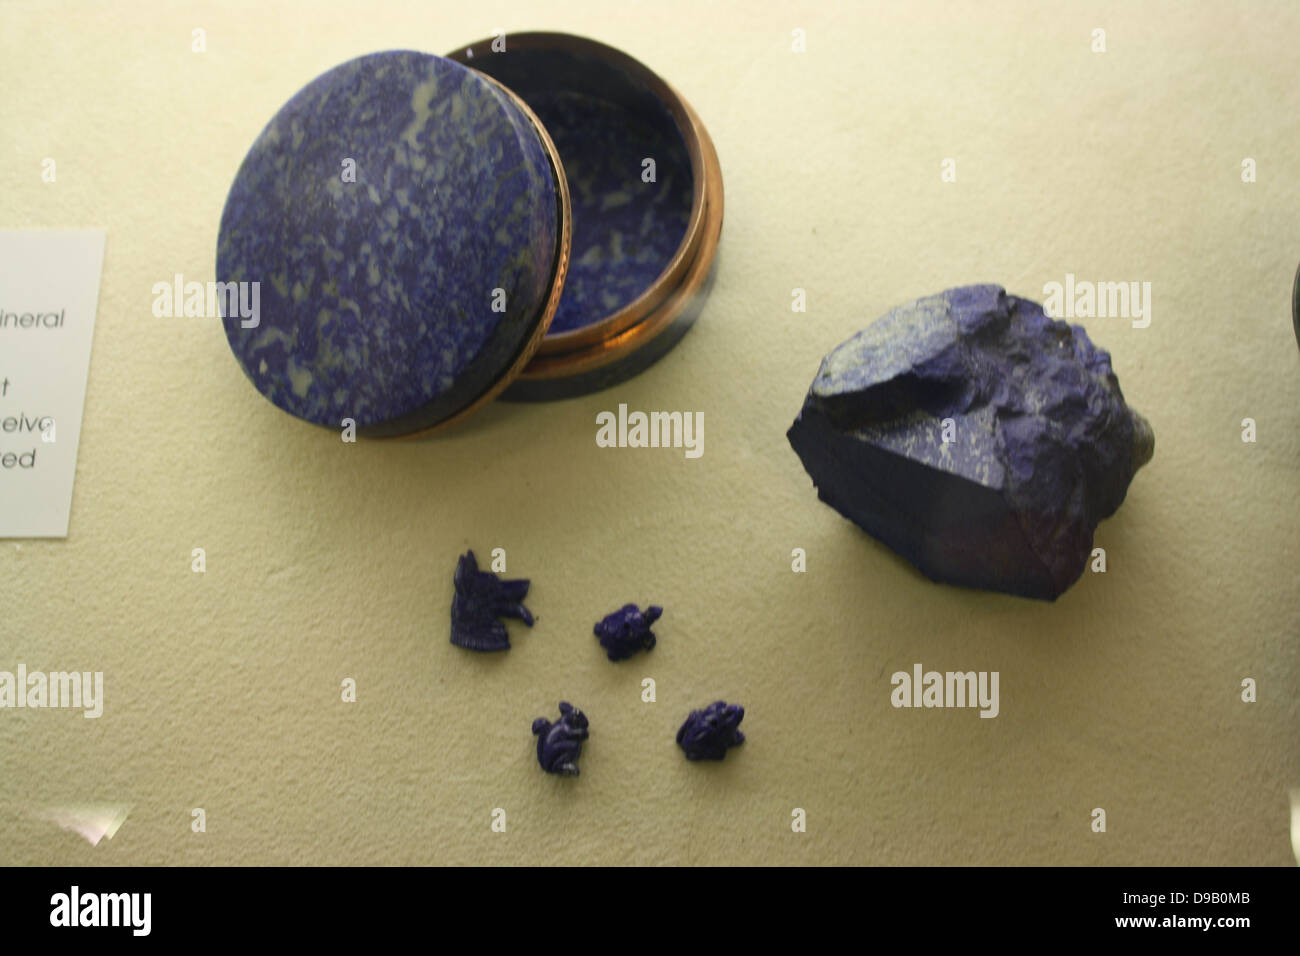 Lapis lazuli.  Decorative stone mainly composed of the mineral lazurite but contains inclusions of other minerals, such as calcite and pyrite.  It is often used for inlays and other decorative items. Stock Photo